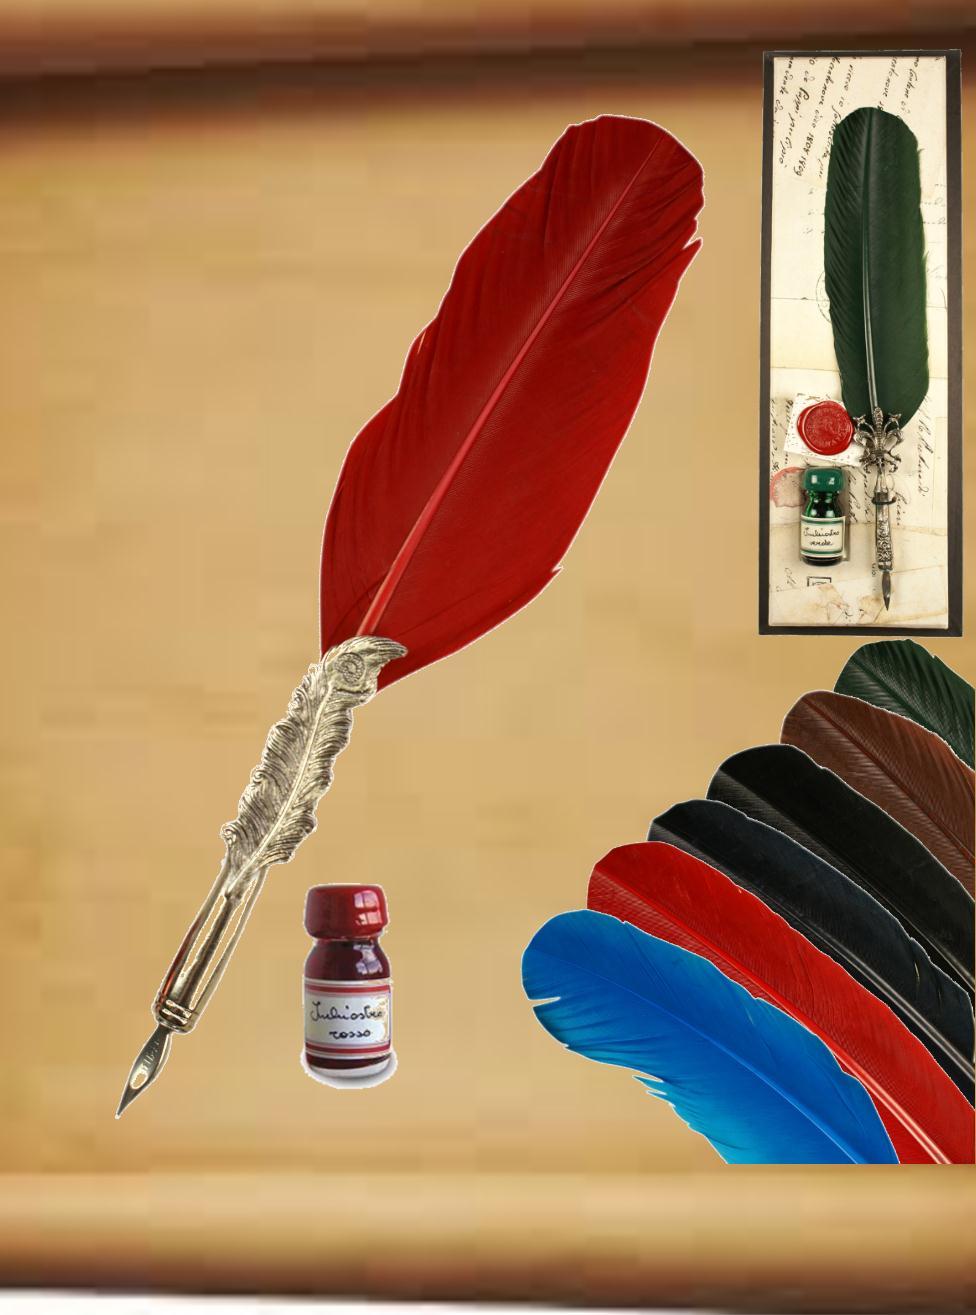 This 7027/G-Set Feather Pen from Rubinato is